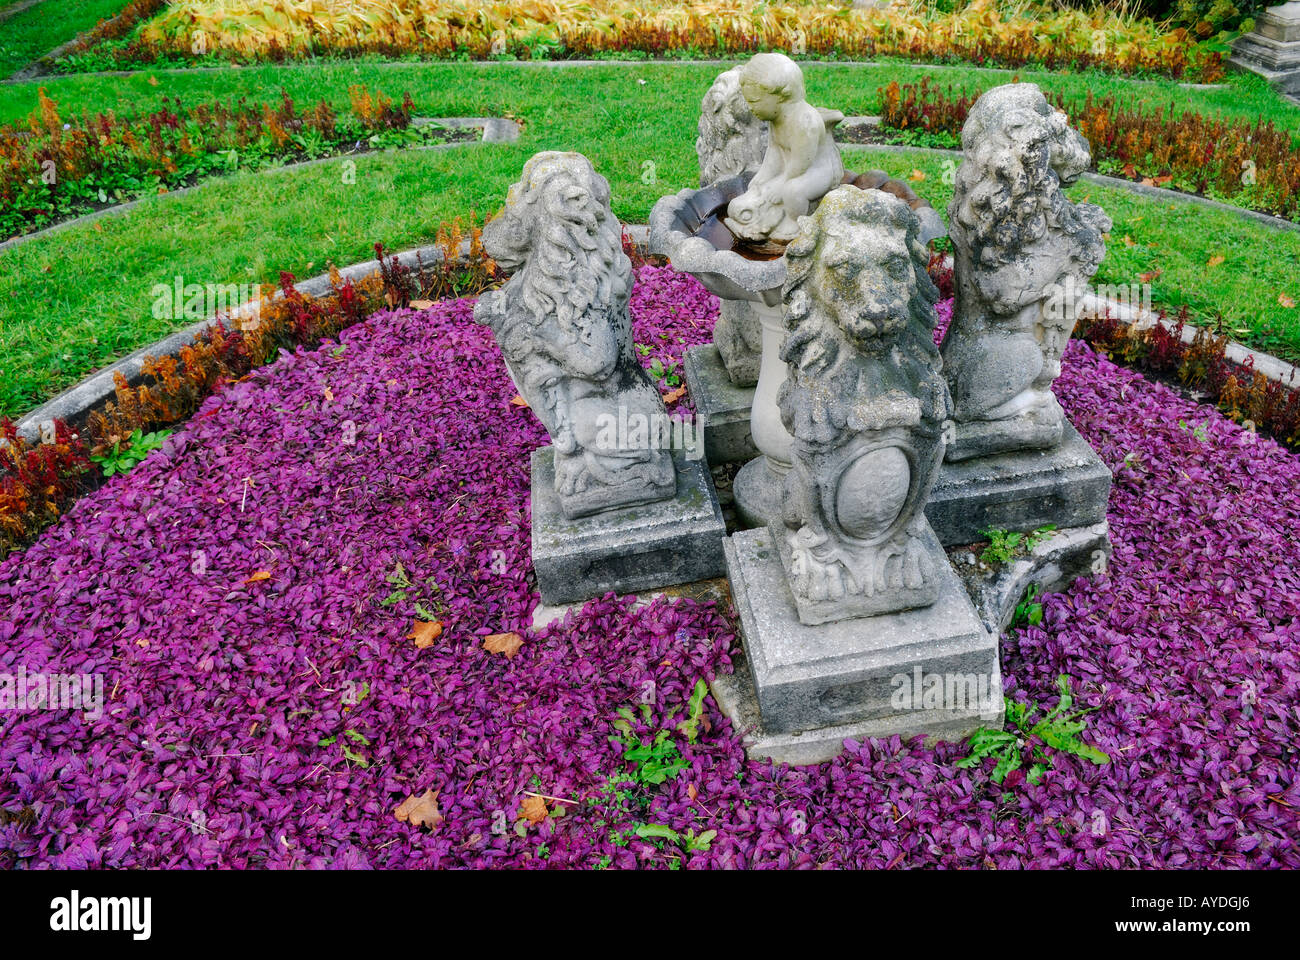 Purple ajuga plants in faded Fall garden with lion statues Stock Photo